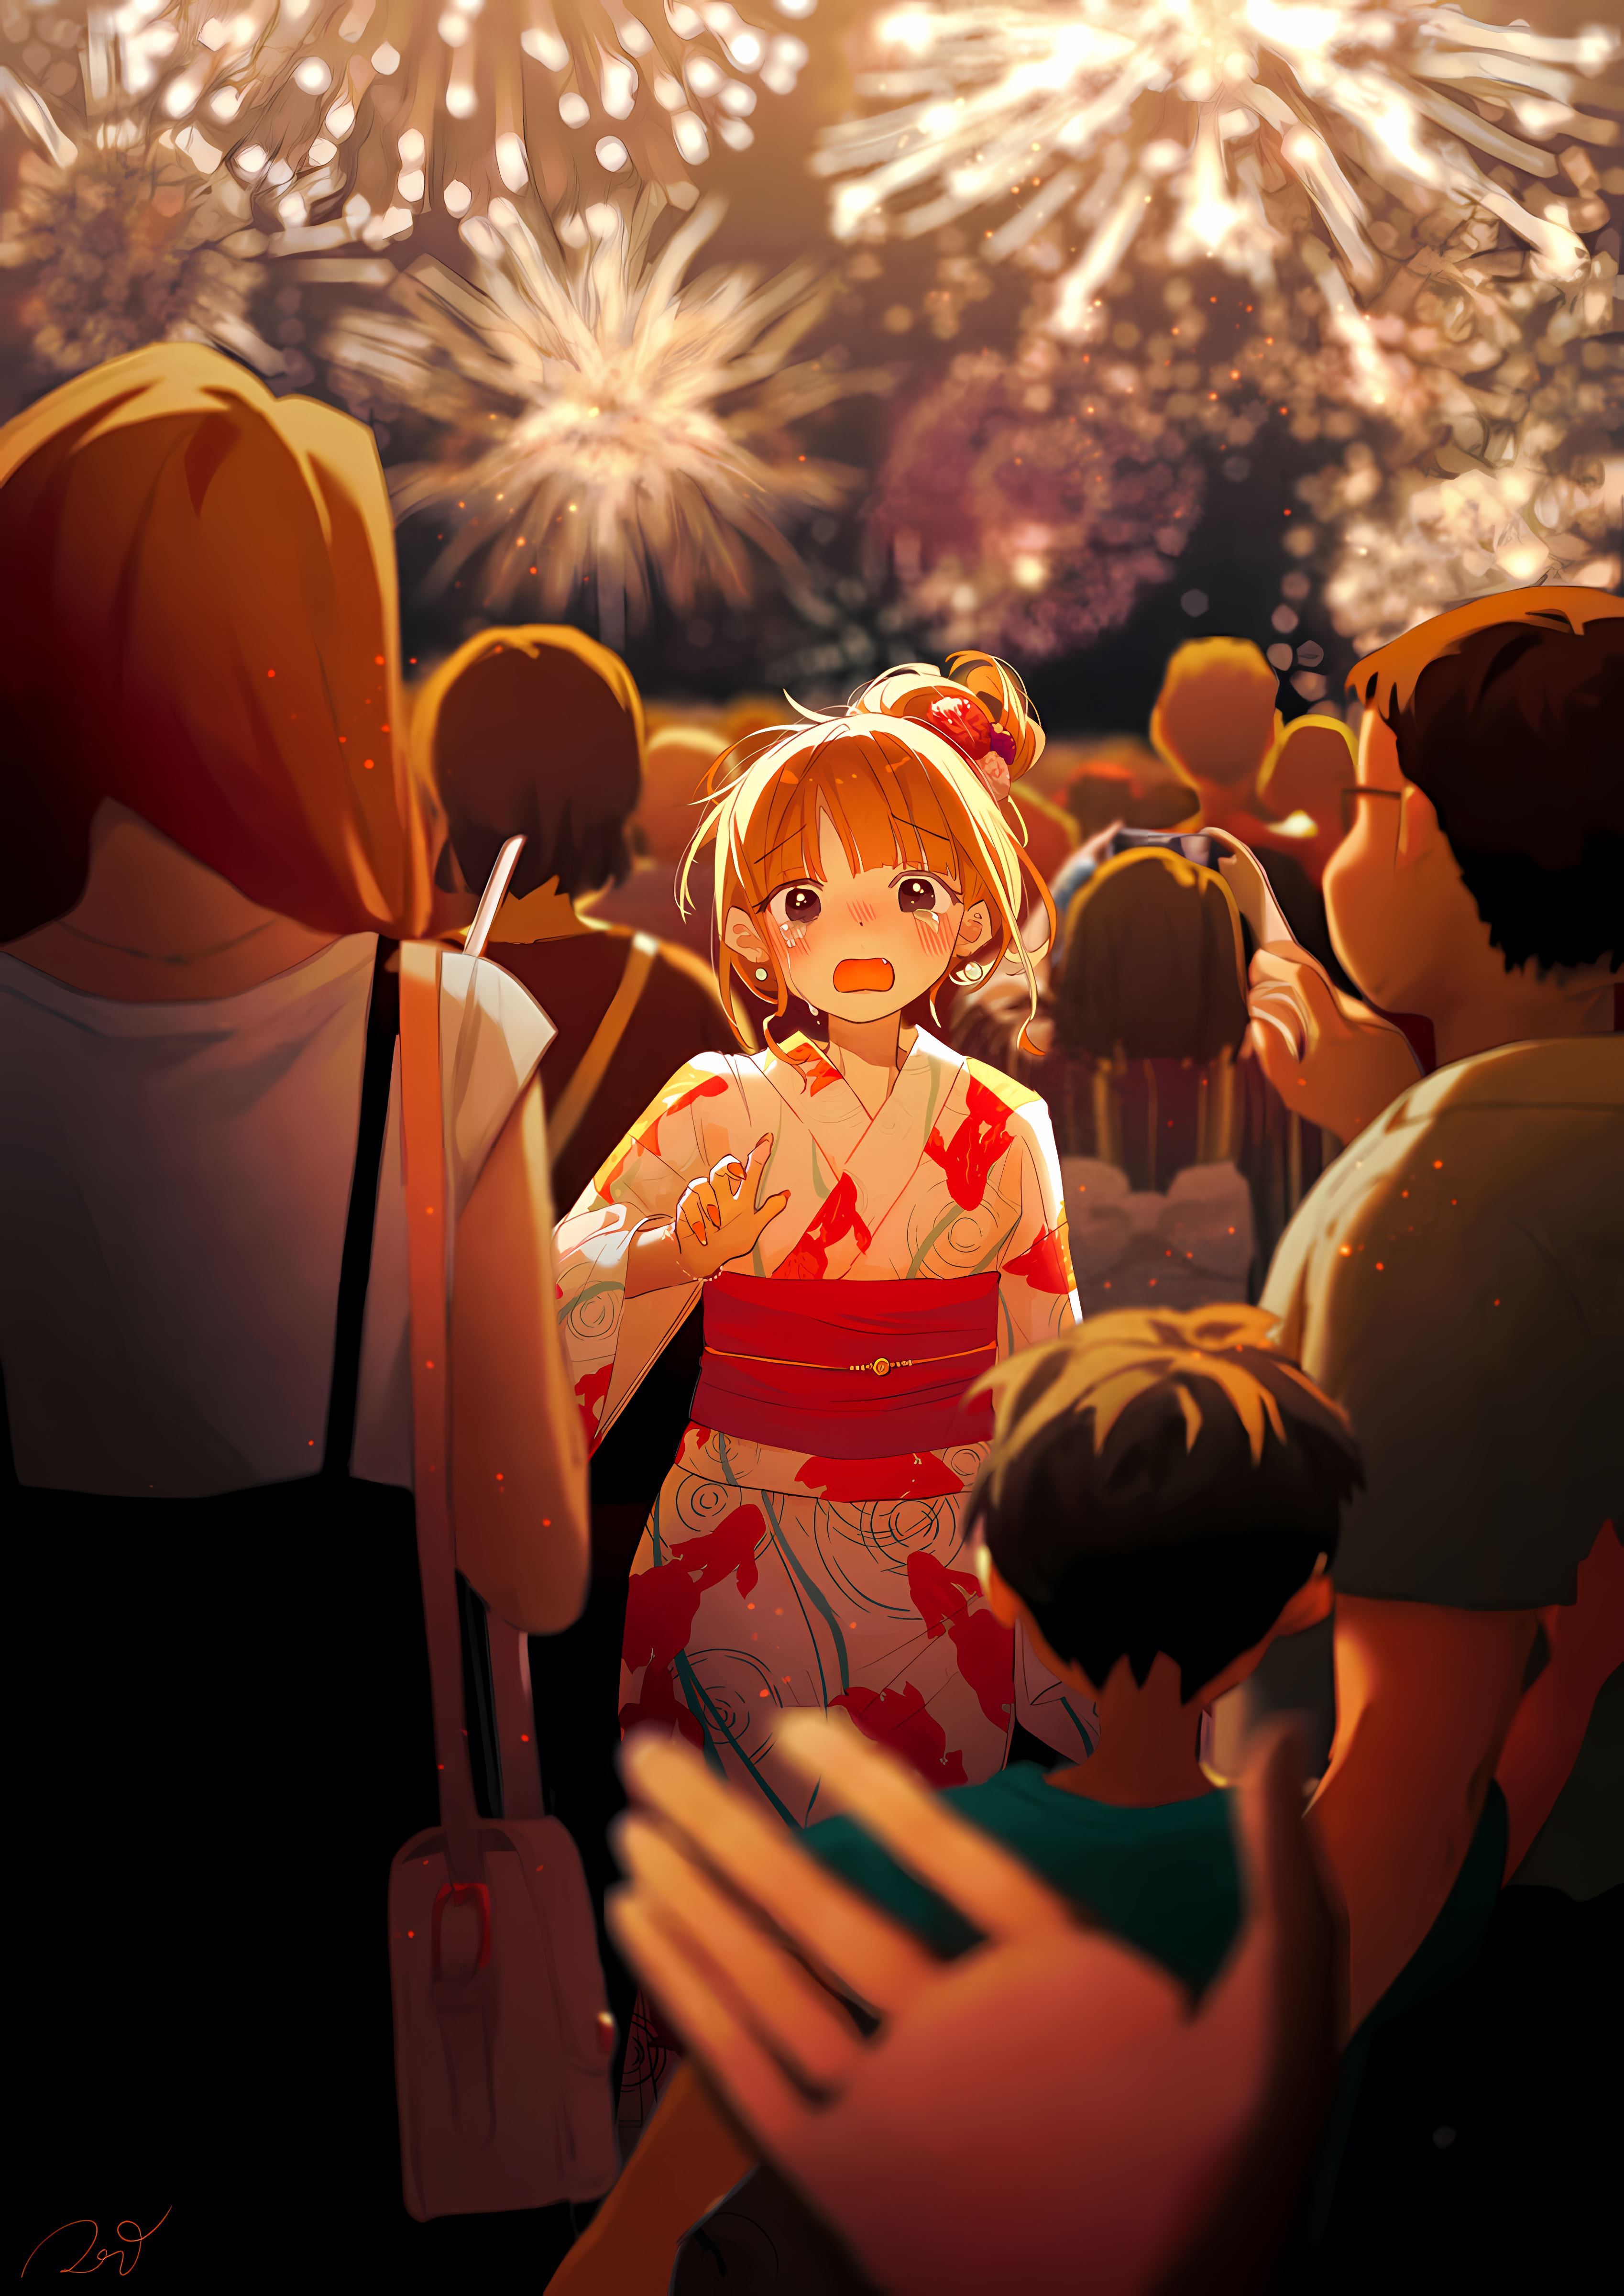 Anime 3396x4800 anime anime girls kimono portrait display tears crying crowds blurred blurry background fireworks looking at viewer arms reaching signature short hair purse hands earring sky Potg